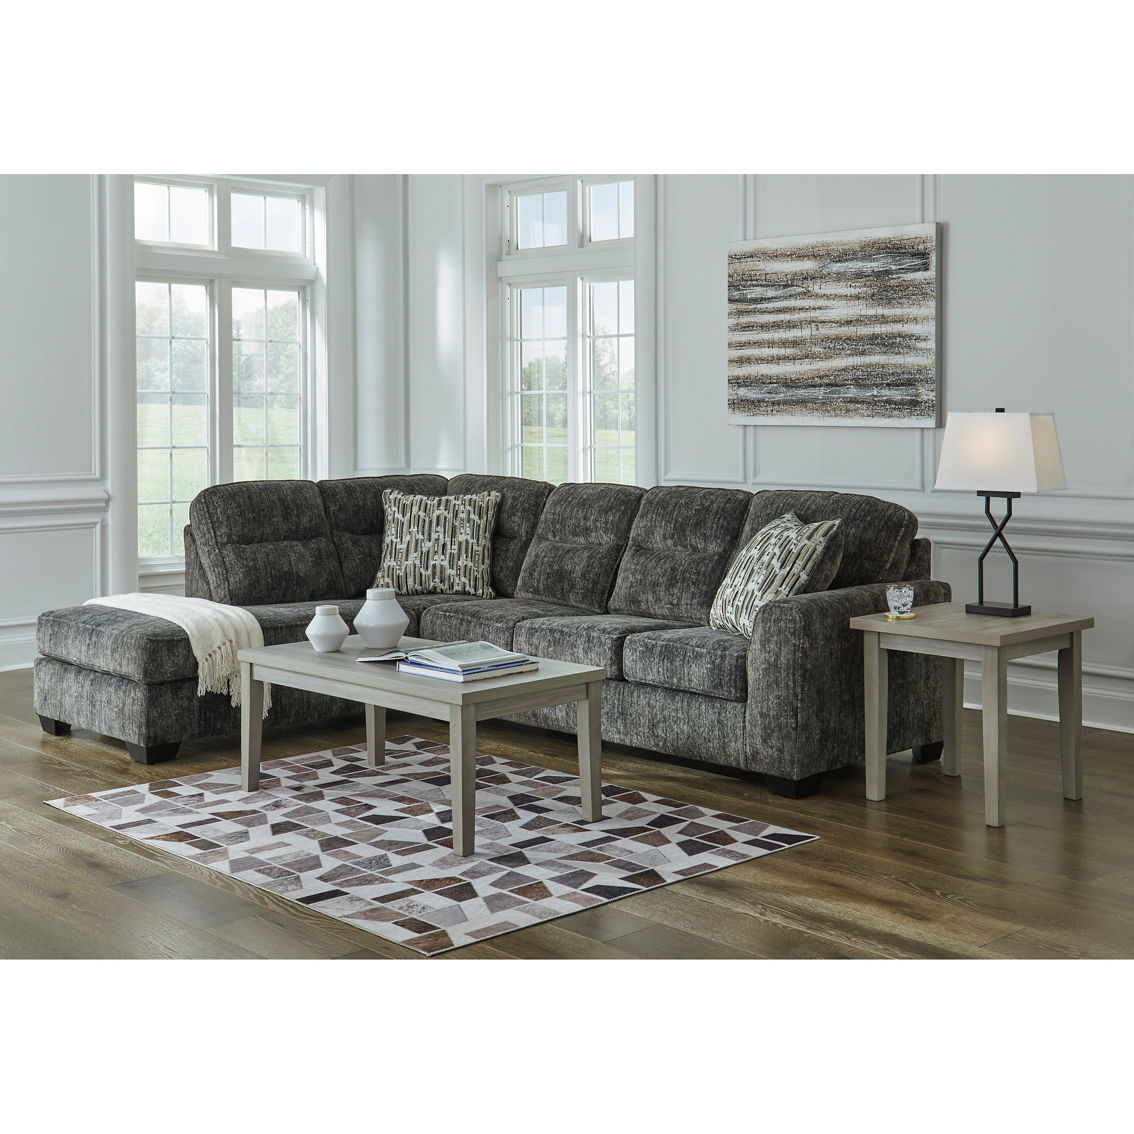 Signature Design by Ashley Lonoke Sectional with Chaise 2 pc. - Image 2 of 2